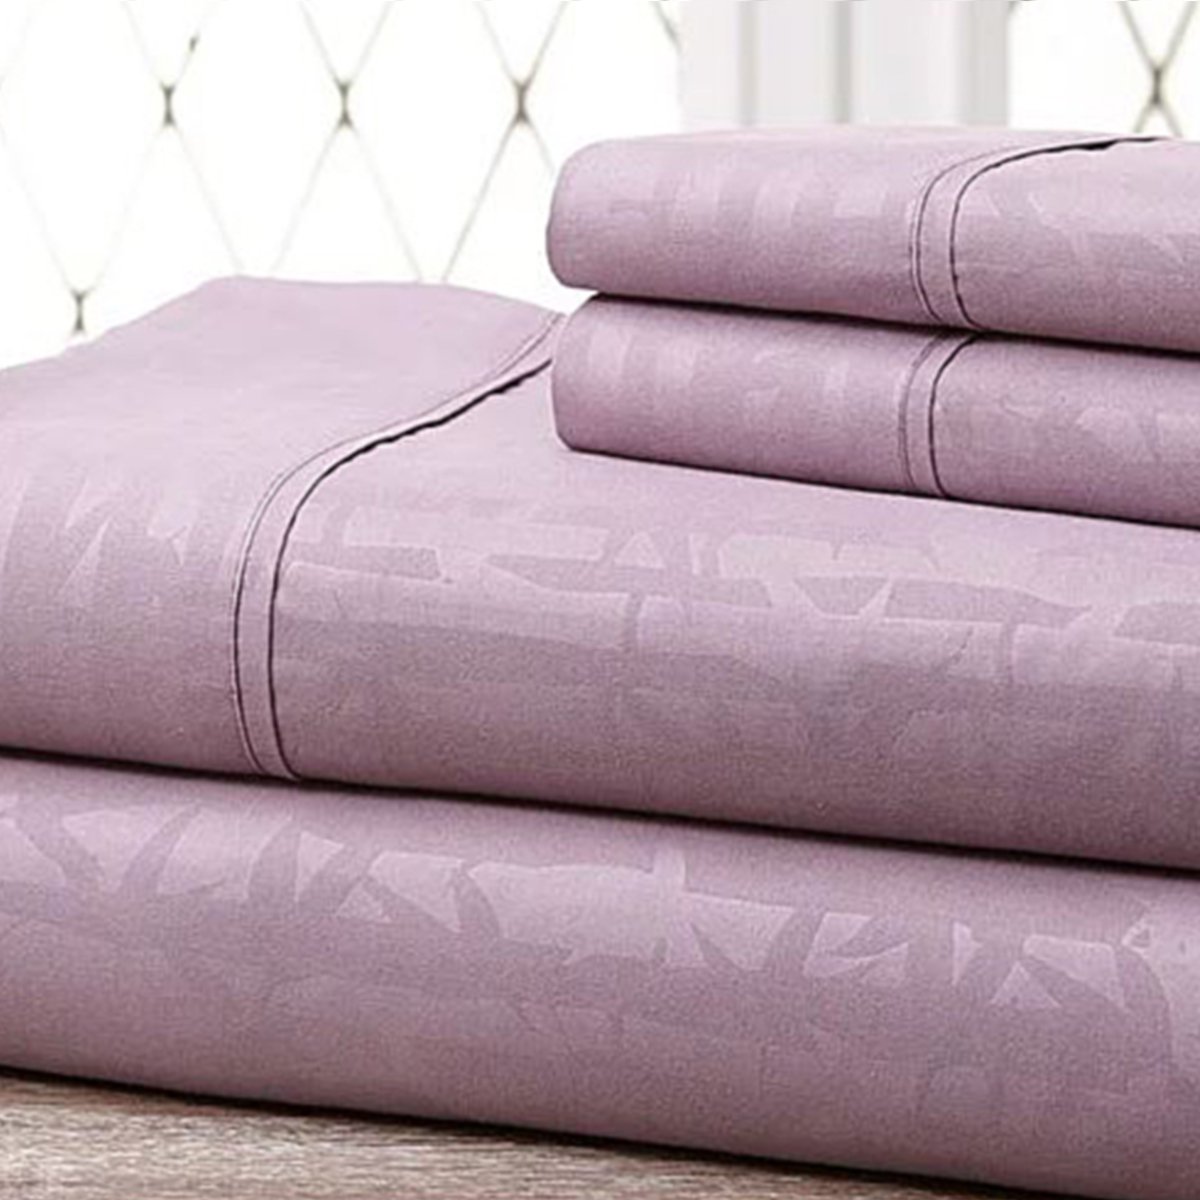 Hny-4pc-eb-lil-k Super-soft 1600 Series Bamboo Embossed Bed Sheet, Lilac - King, 4 Piece